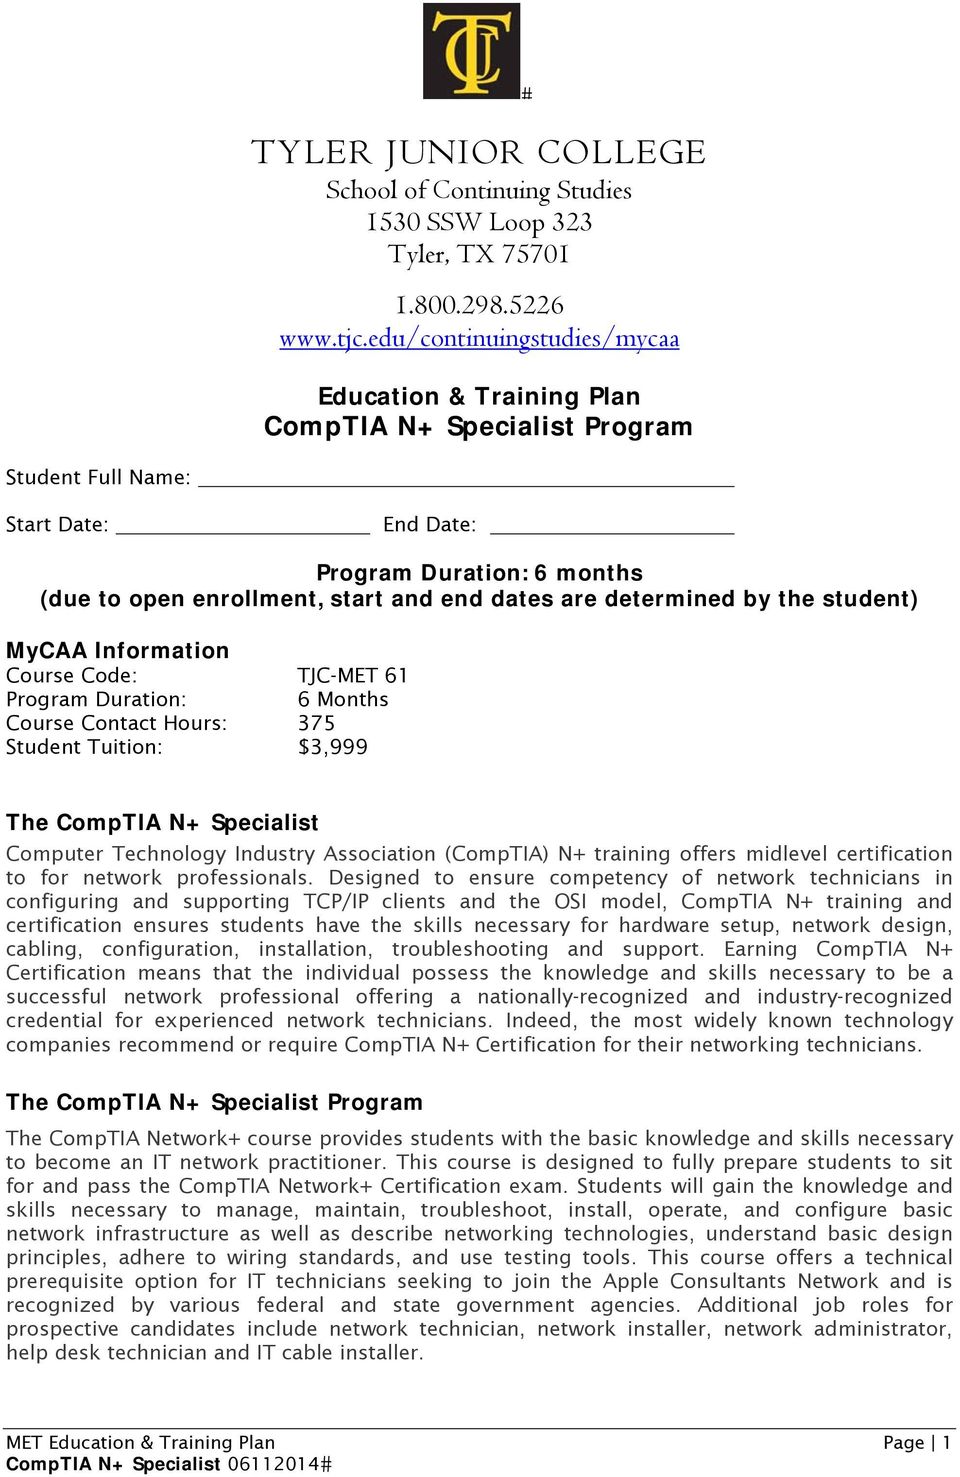 are determined by the student) MyCAA Information Course Code: TJC-MET 61 Program Duration: 6 Months Course Contact Hours: 375 Student Tuition: $3,999 The CompTIA N+ Specialist Computer Technology